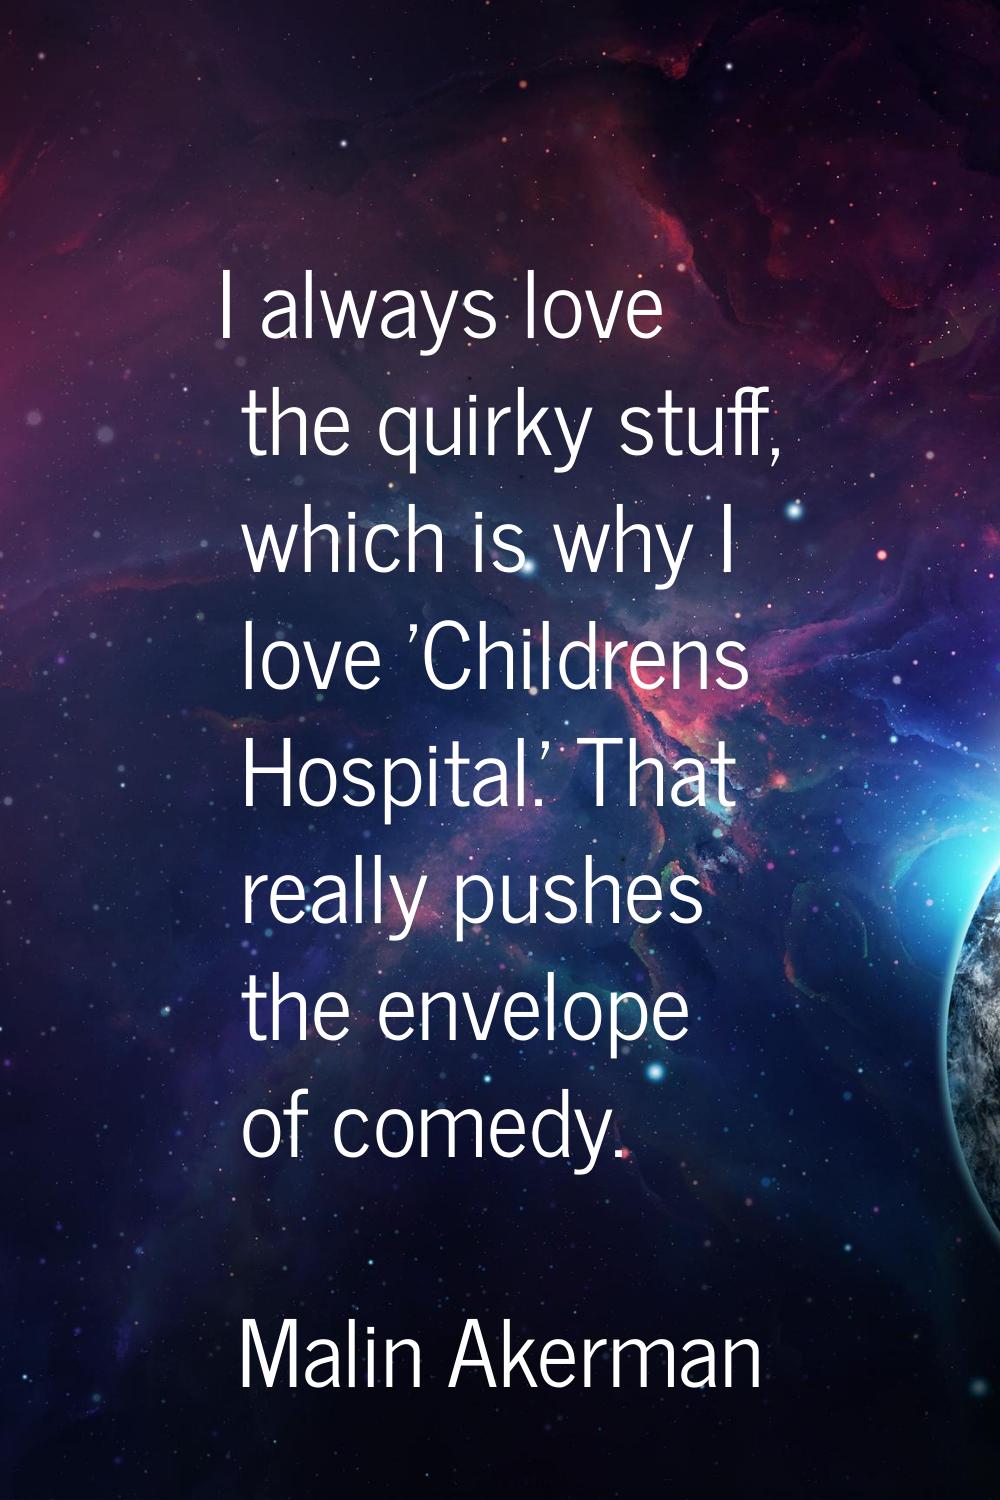 I always love the quirky stuff, which is why I love 'Childrens Hospital.' That really pushes the en